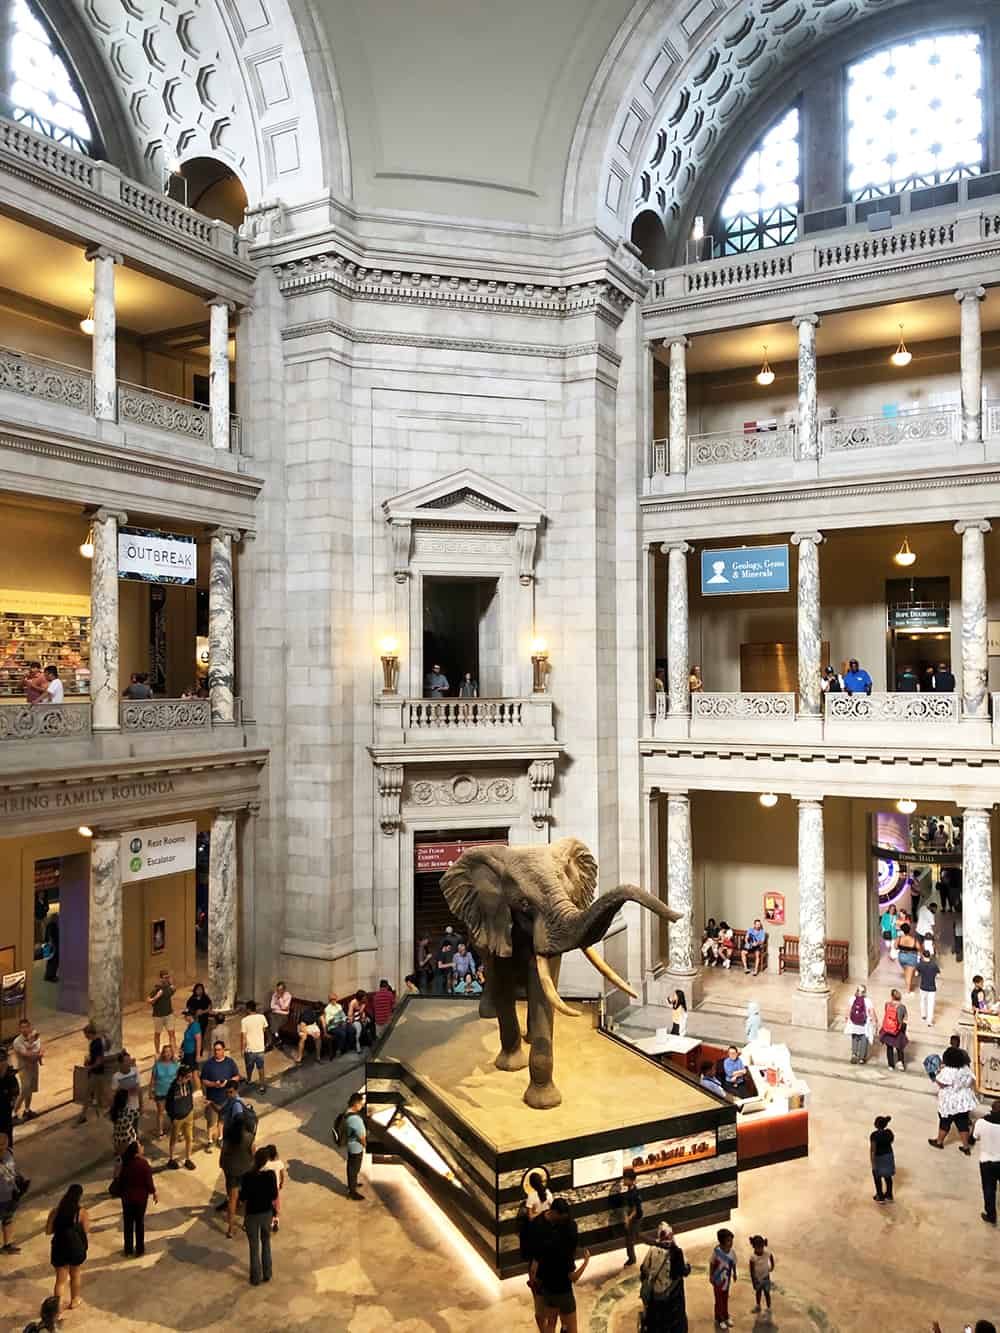 Smithsonian National Museum of Natural History in Washington DC | where we have visited in DC + our DC bucket list for the future | via Autumn All Along